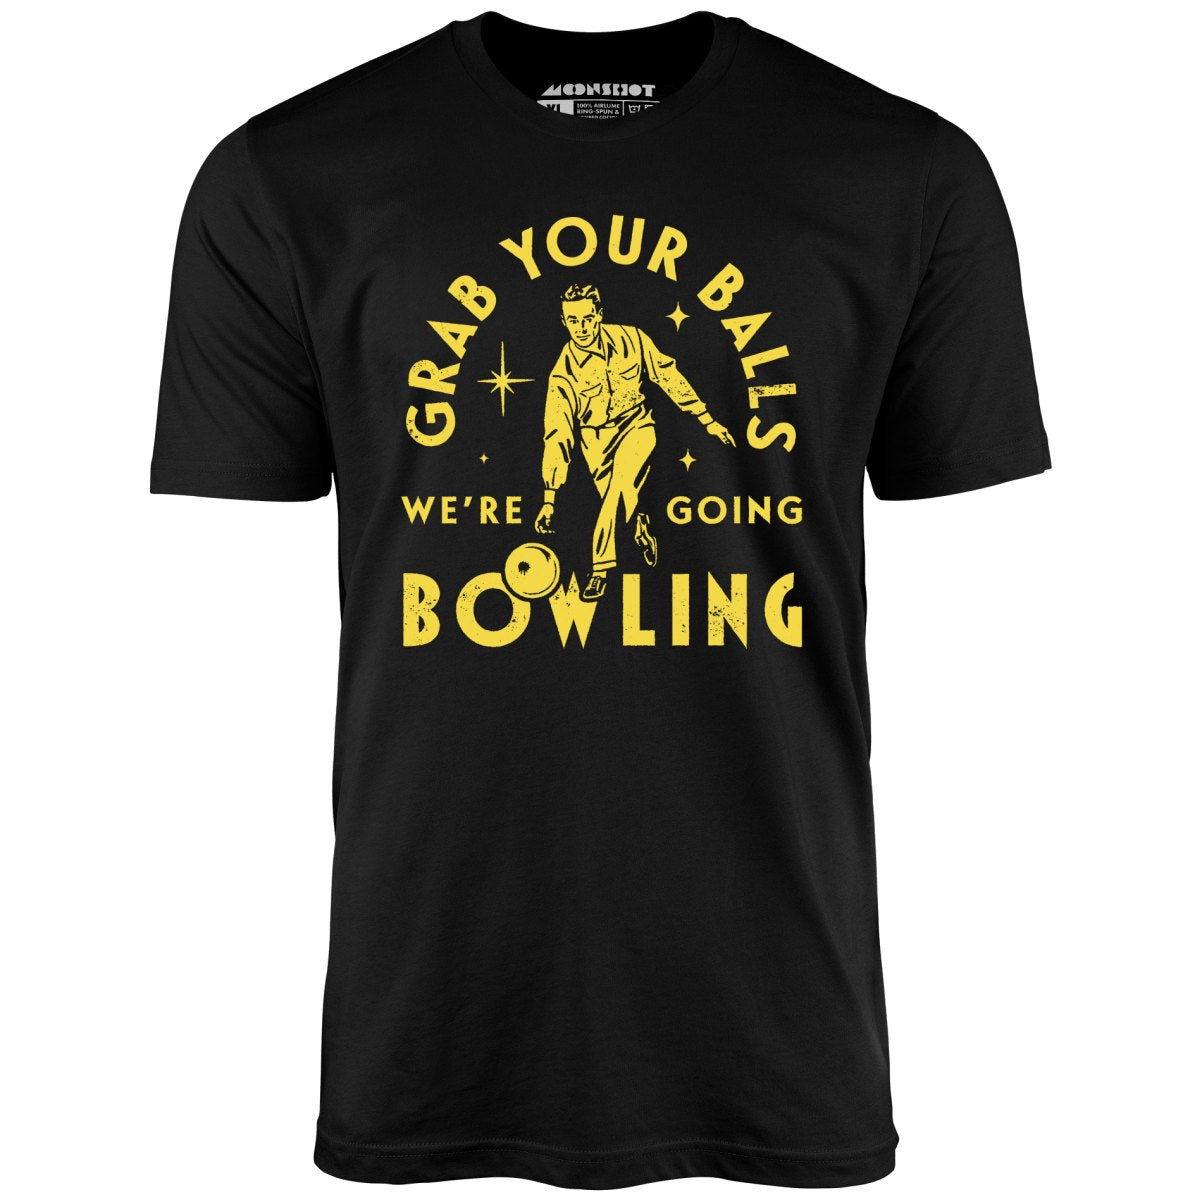 Grab Your Balls We're Going Bowling - Unisex T-Shirt